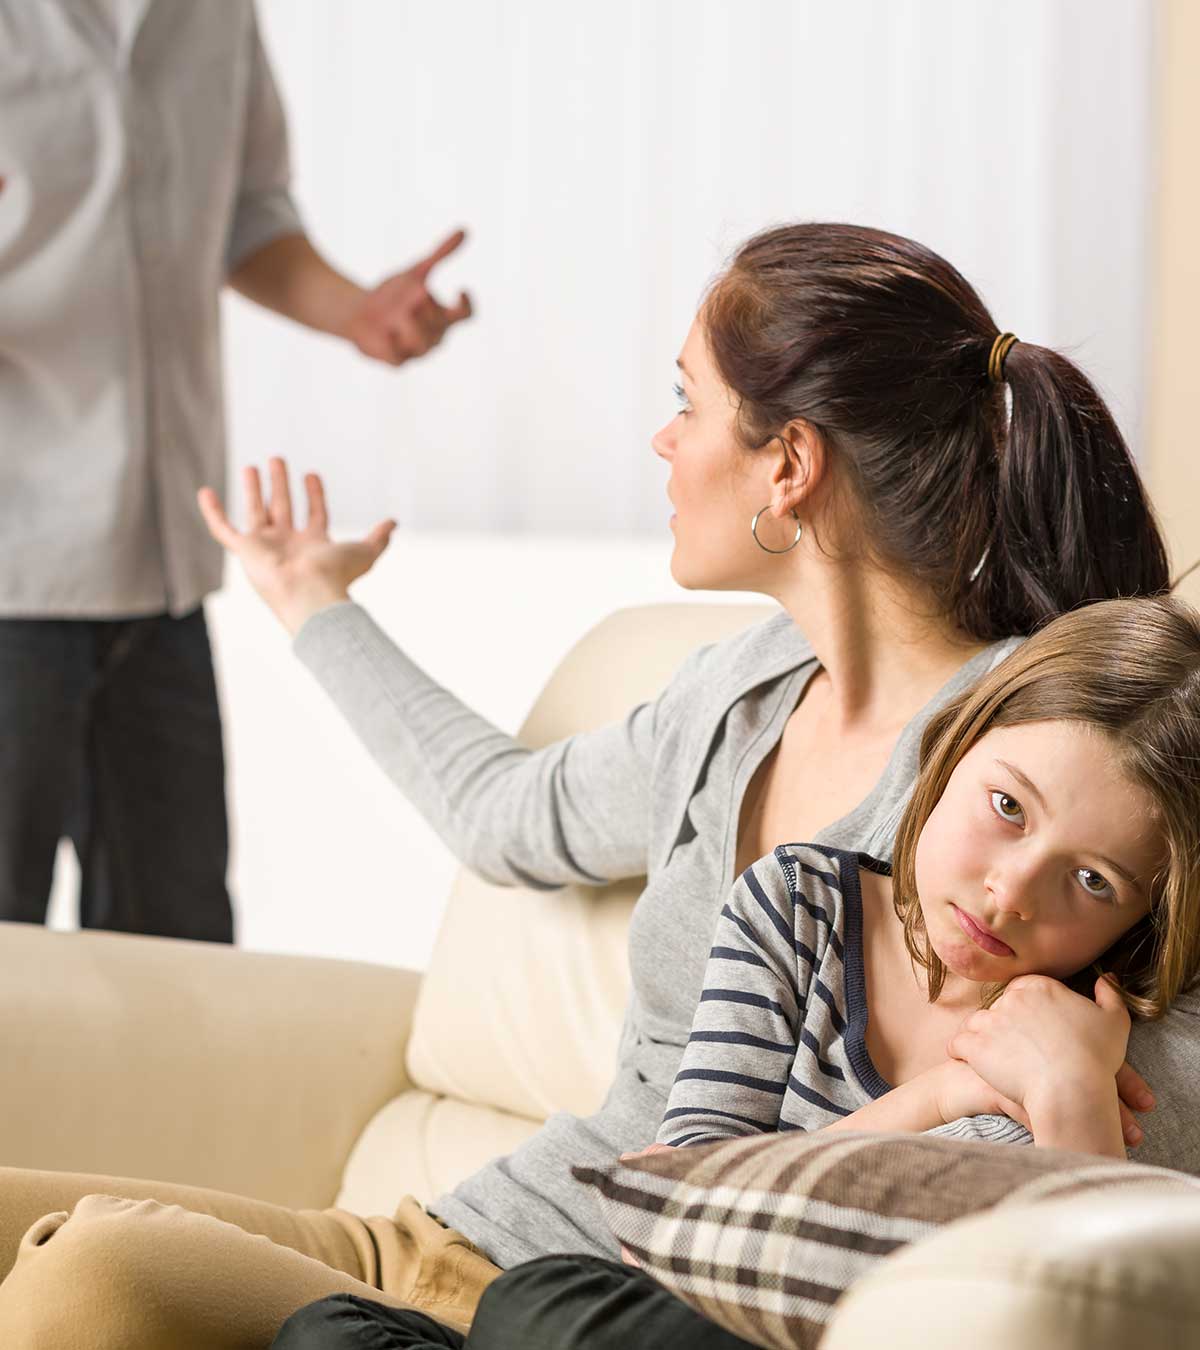 10 Serious Negative Effects Of Verbal Abuse On Children